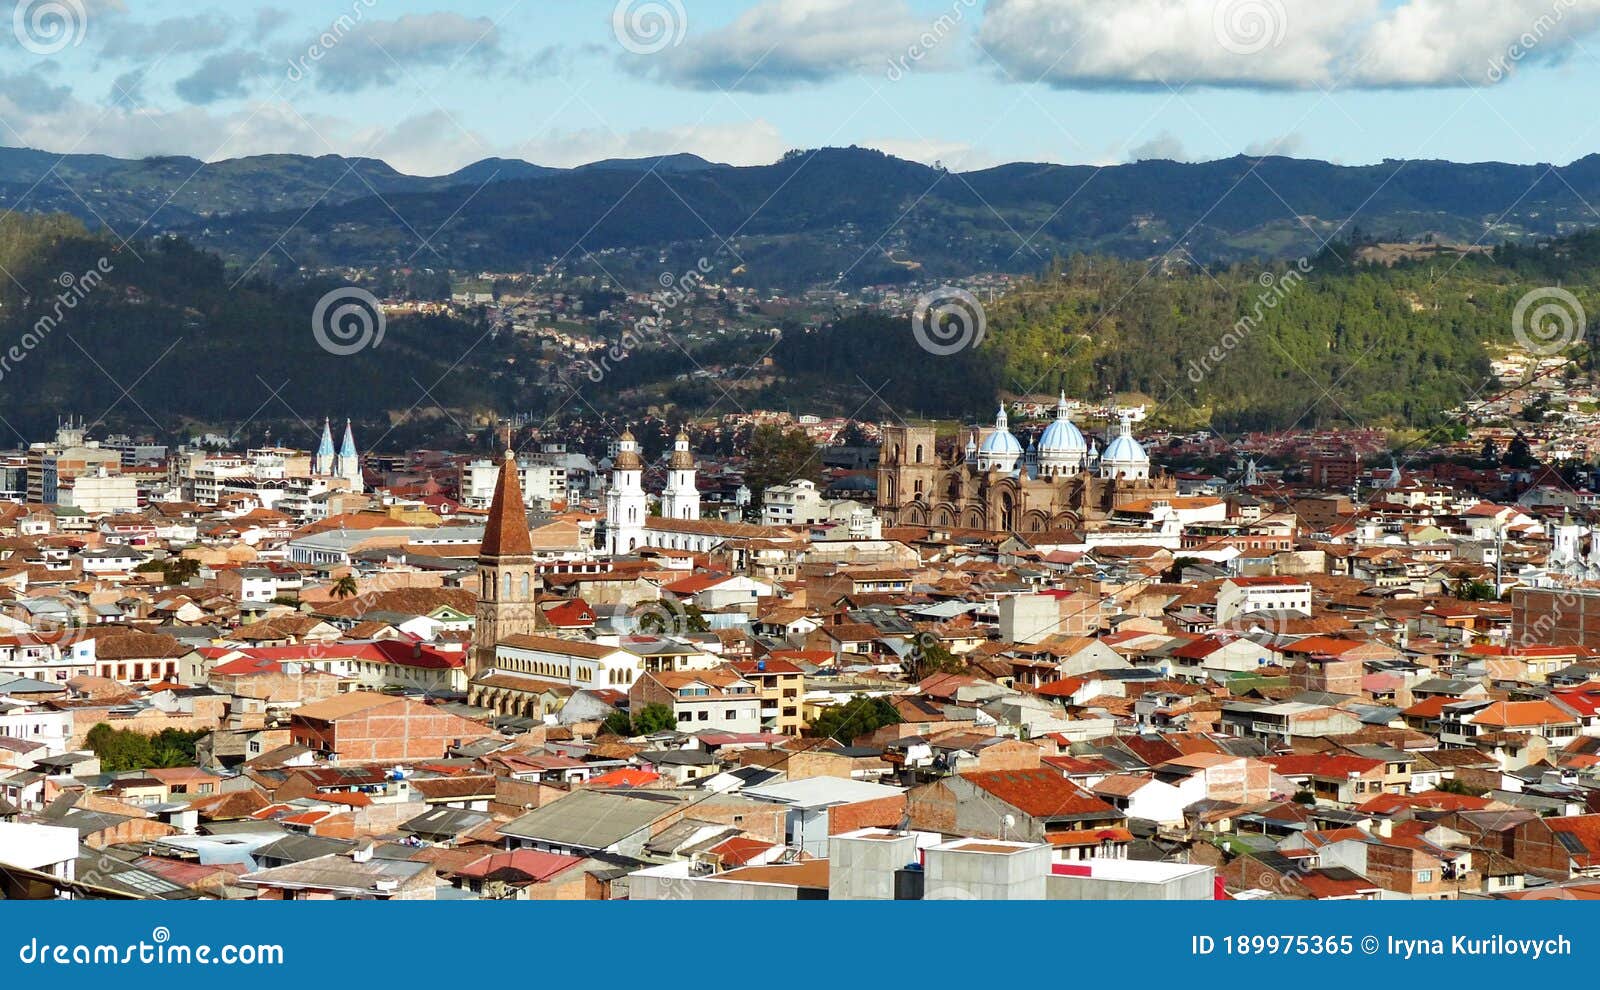 panoramic view of the city cuenca at the valley, ecuador